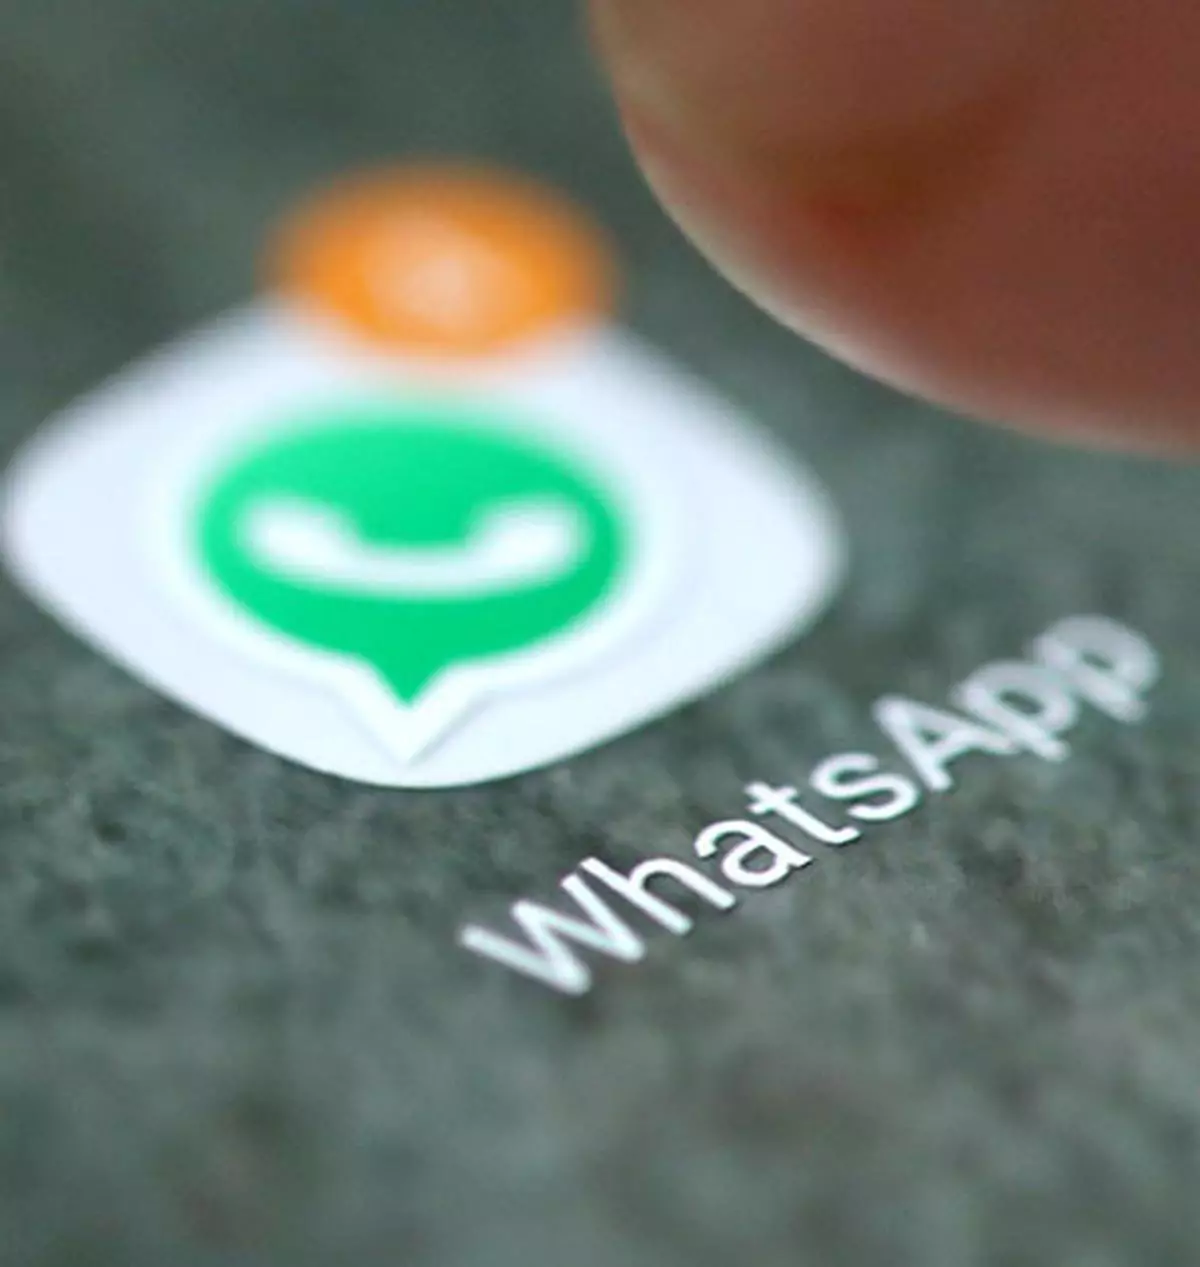 WhatsApp released its user monthly report for August 2022